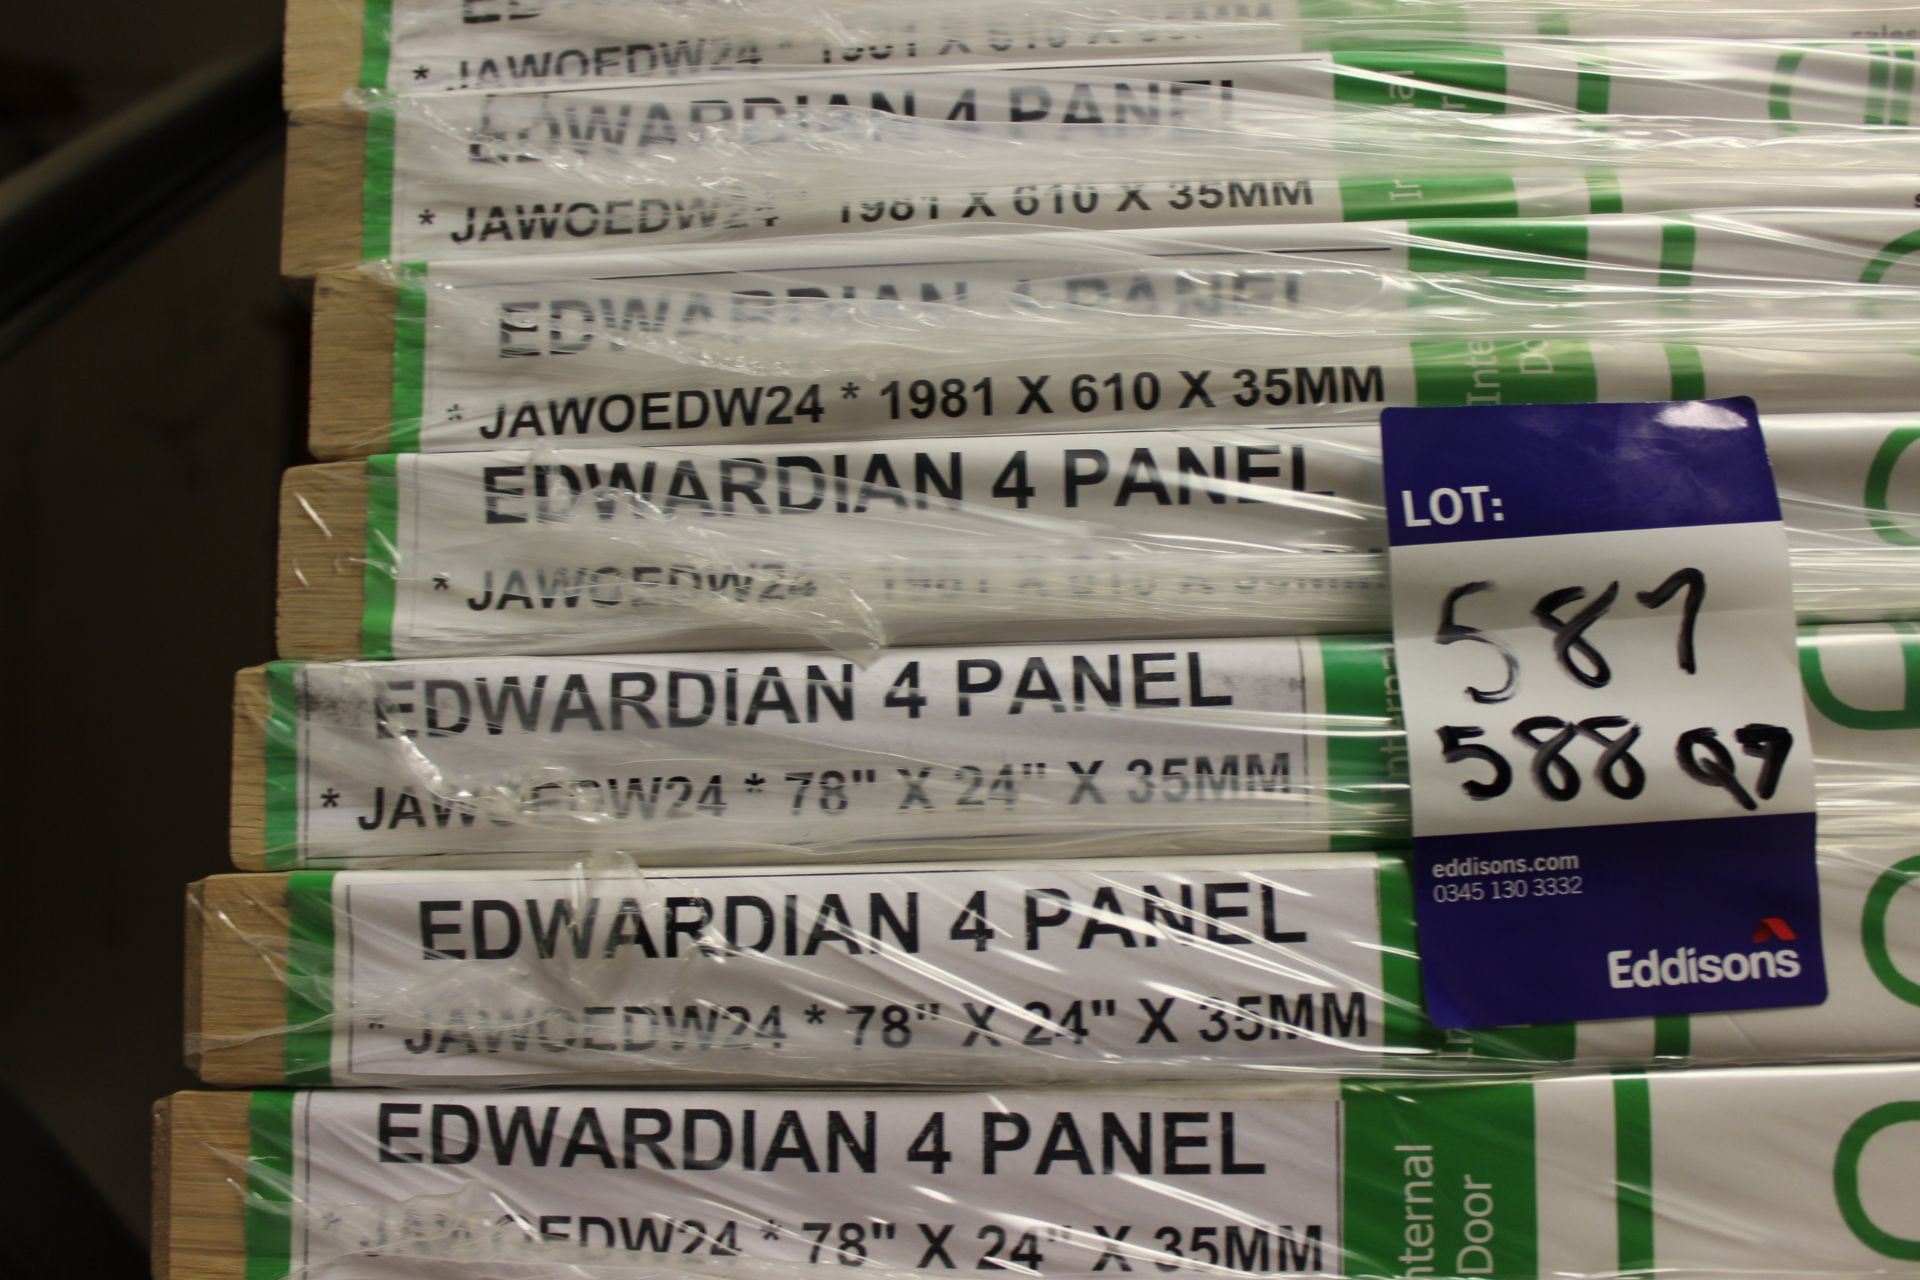 7x Edwardian 4 panel JAWOEDW24 Internal Door, 78” x 24” x 35mm - Lots to be handed out in order they - Image 3 of 3